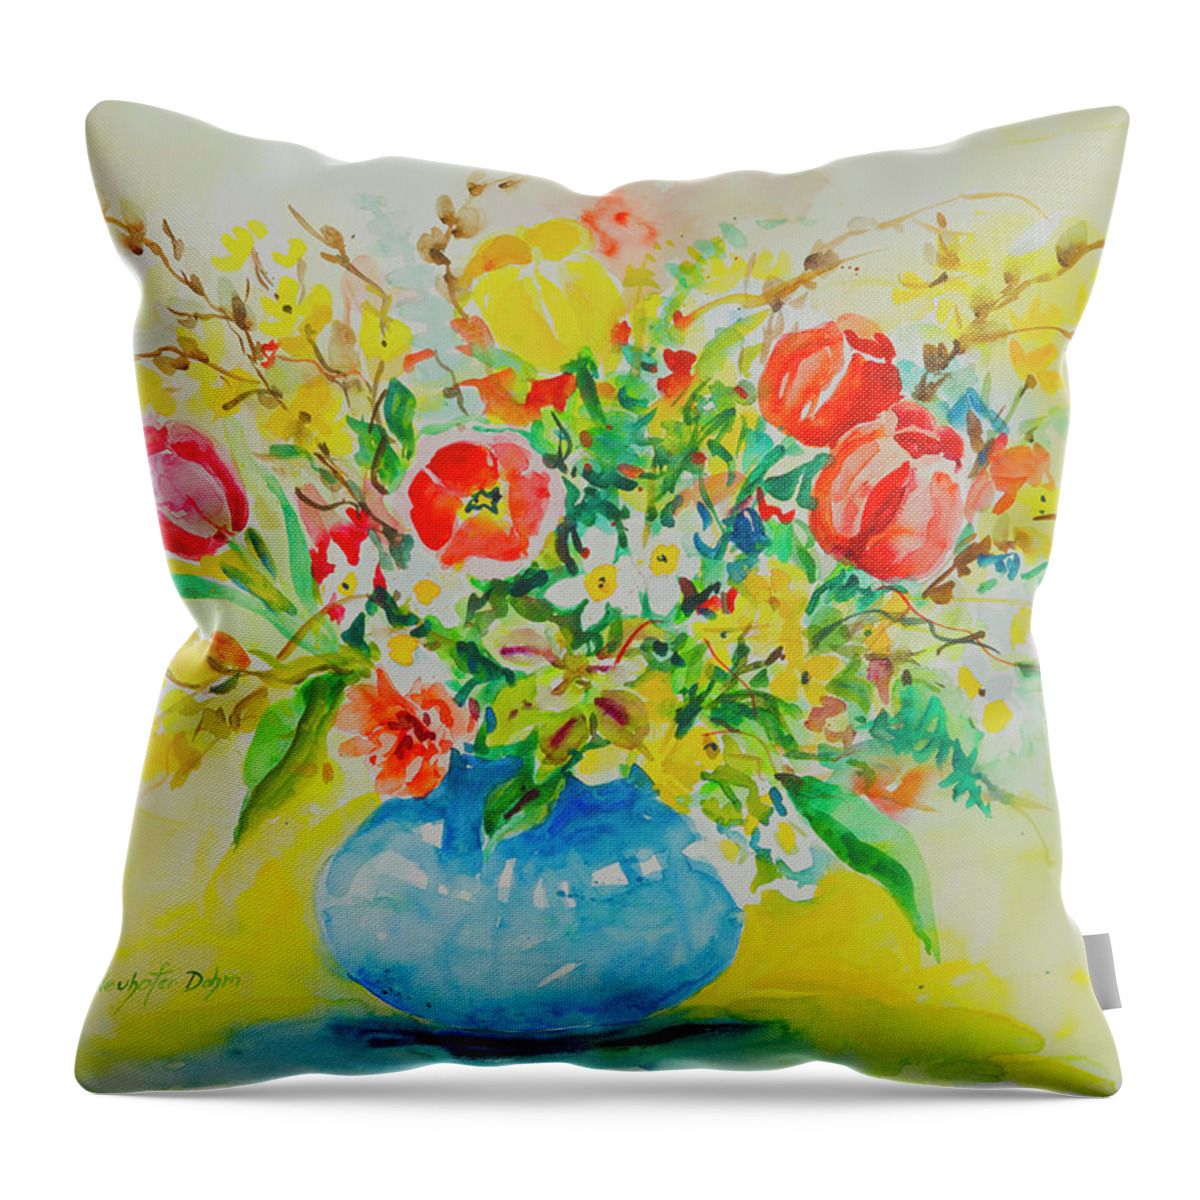 Flowers Throw Pillow featuring the painting Watercolor Series 179 by Ingrid Dohm